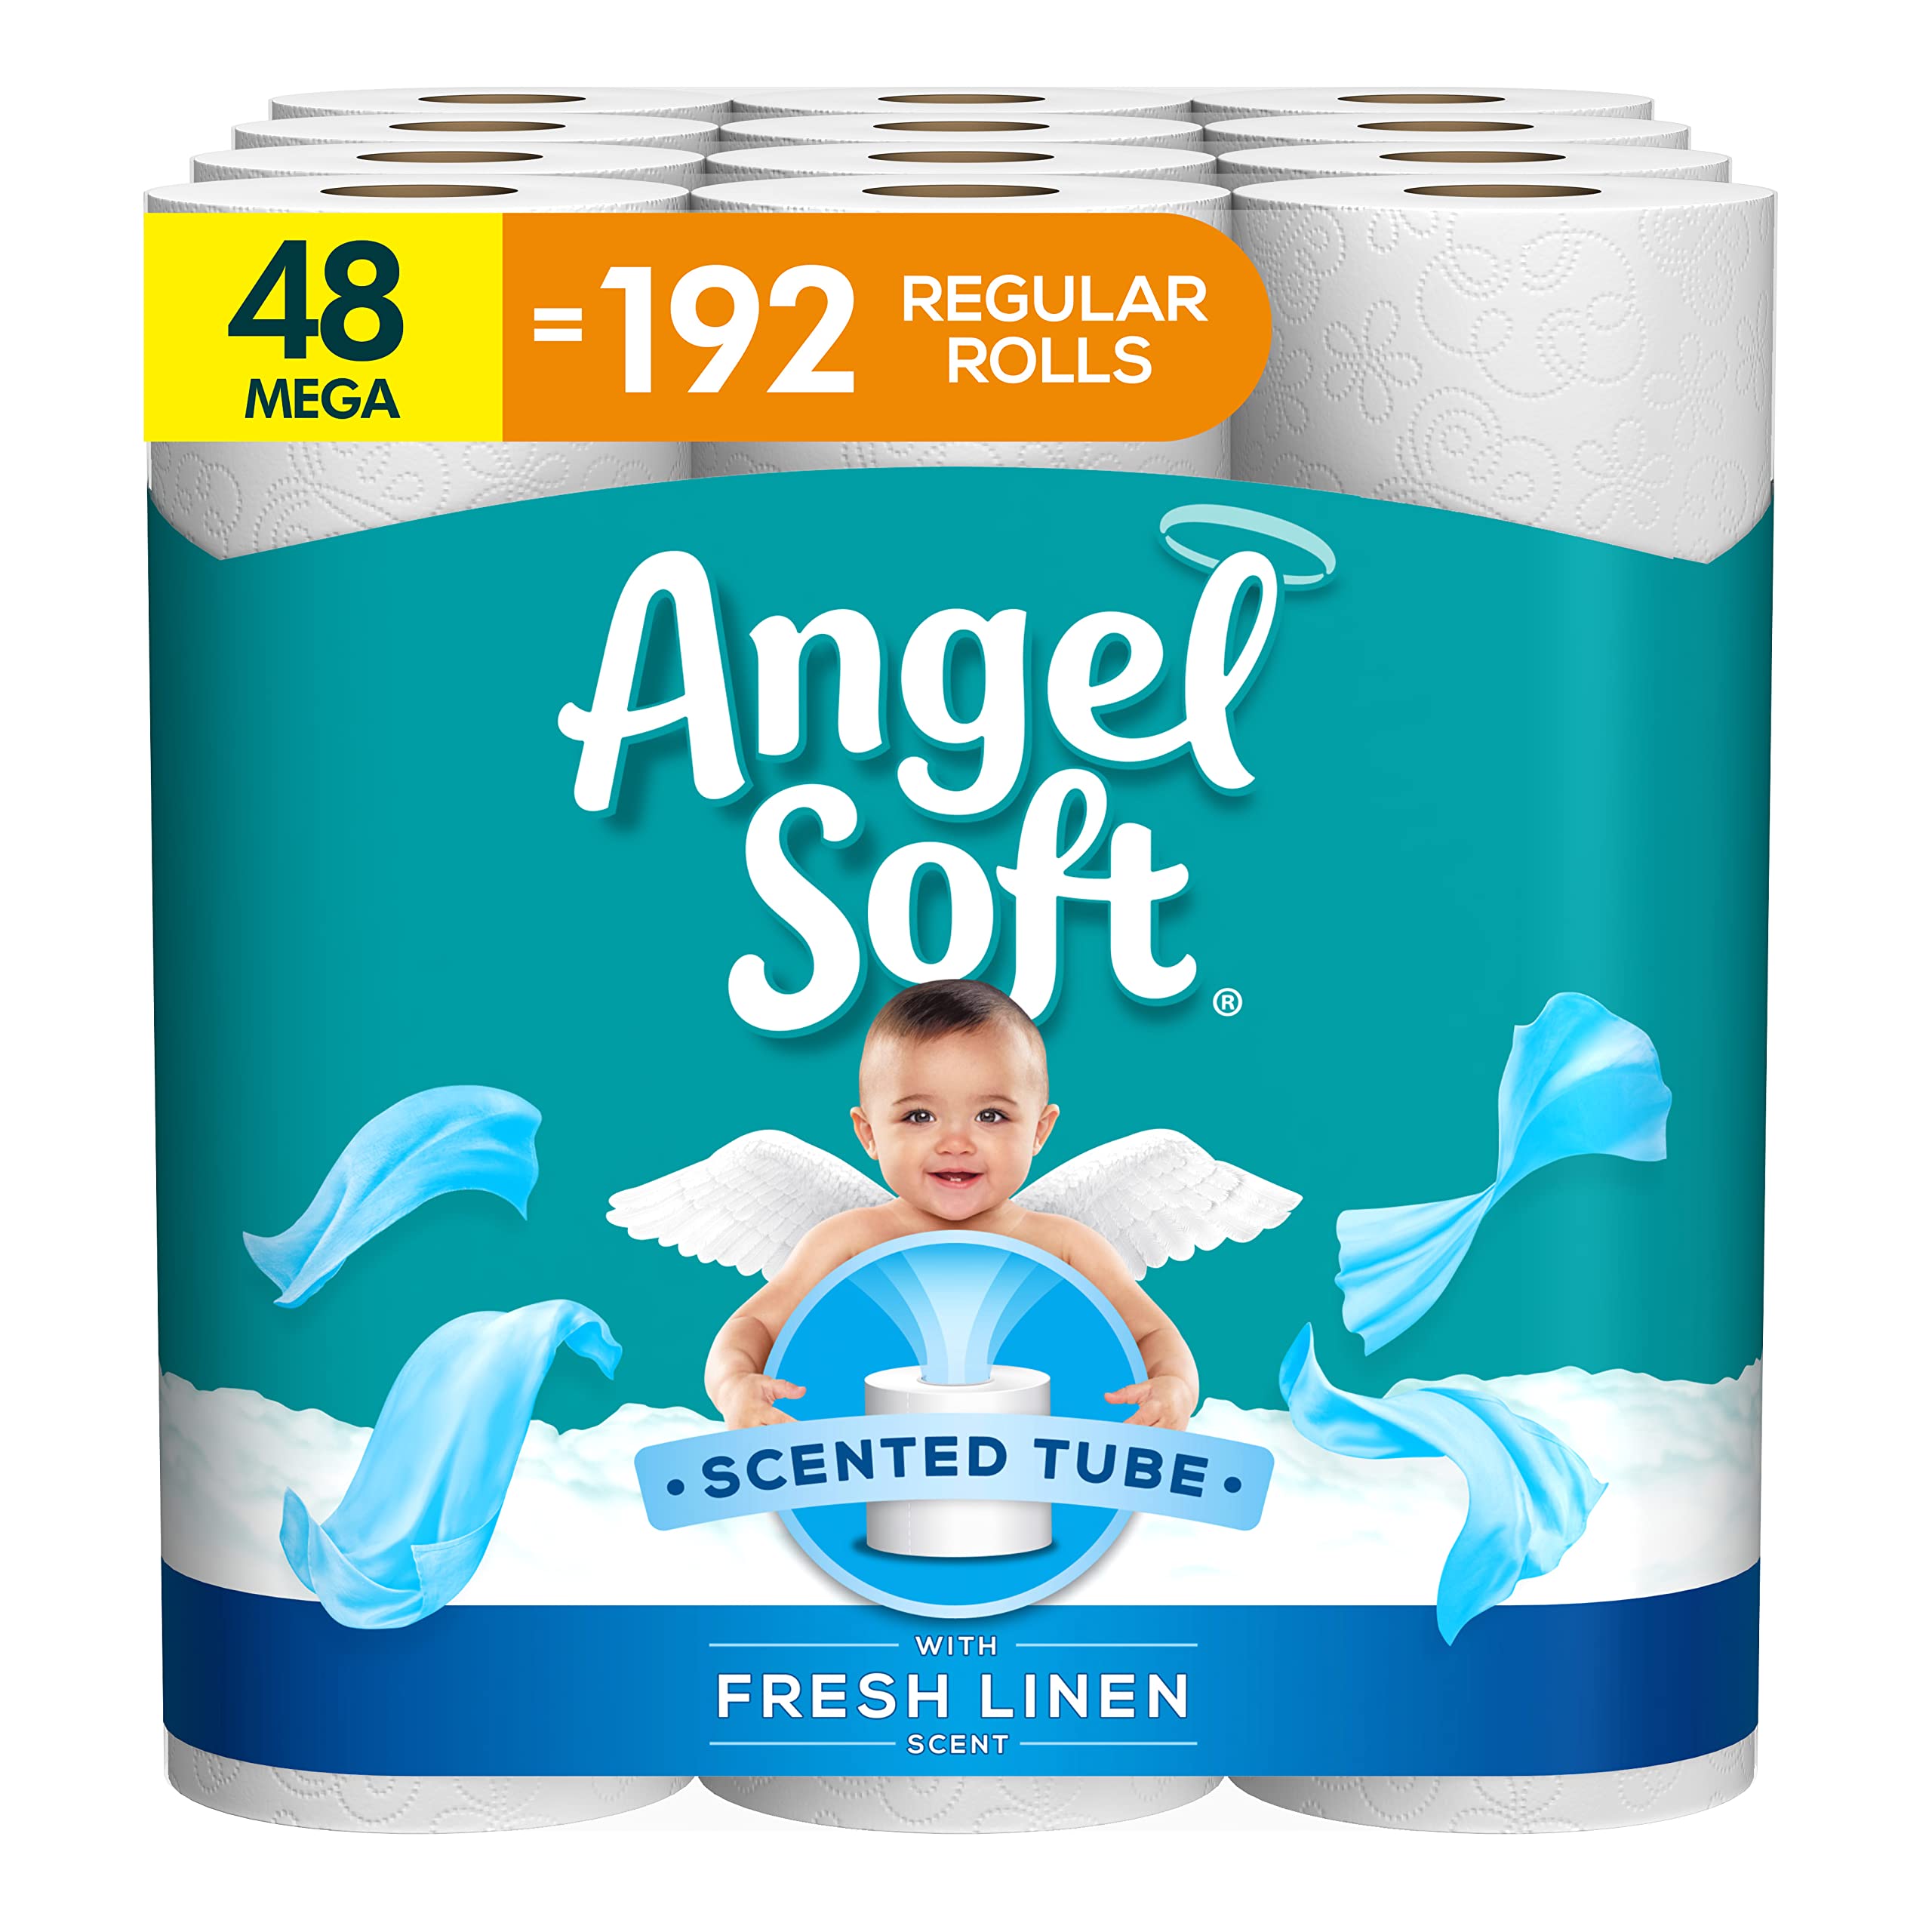 Angel Soft Toilet Paper, 48 Mega Rolls with Linen Scented Tube